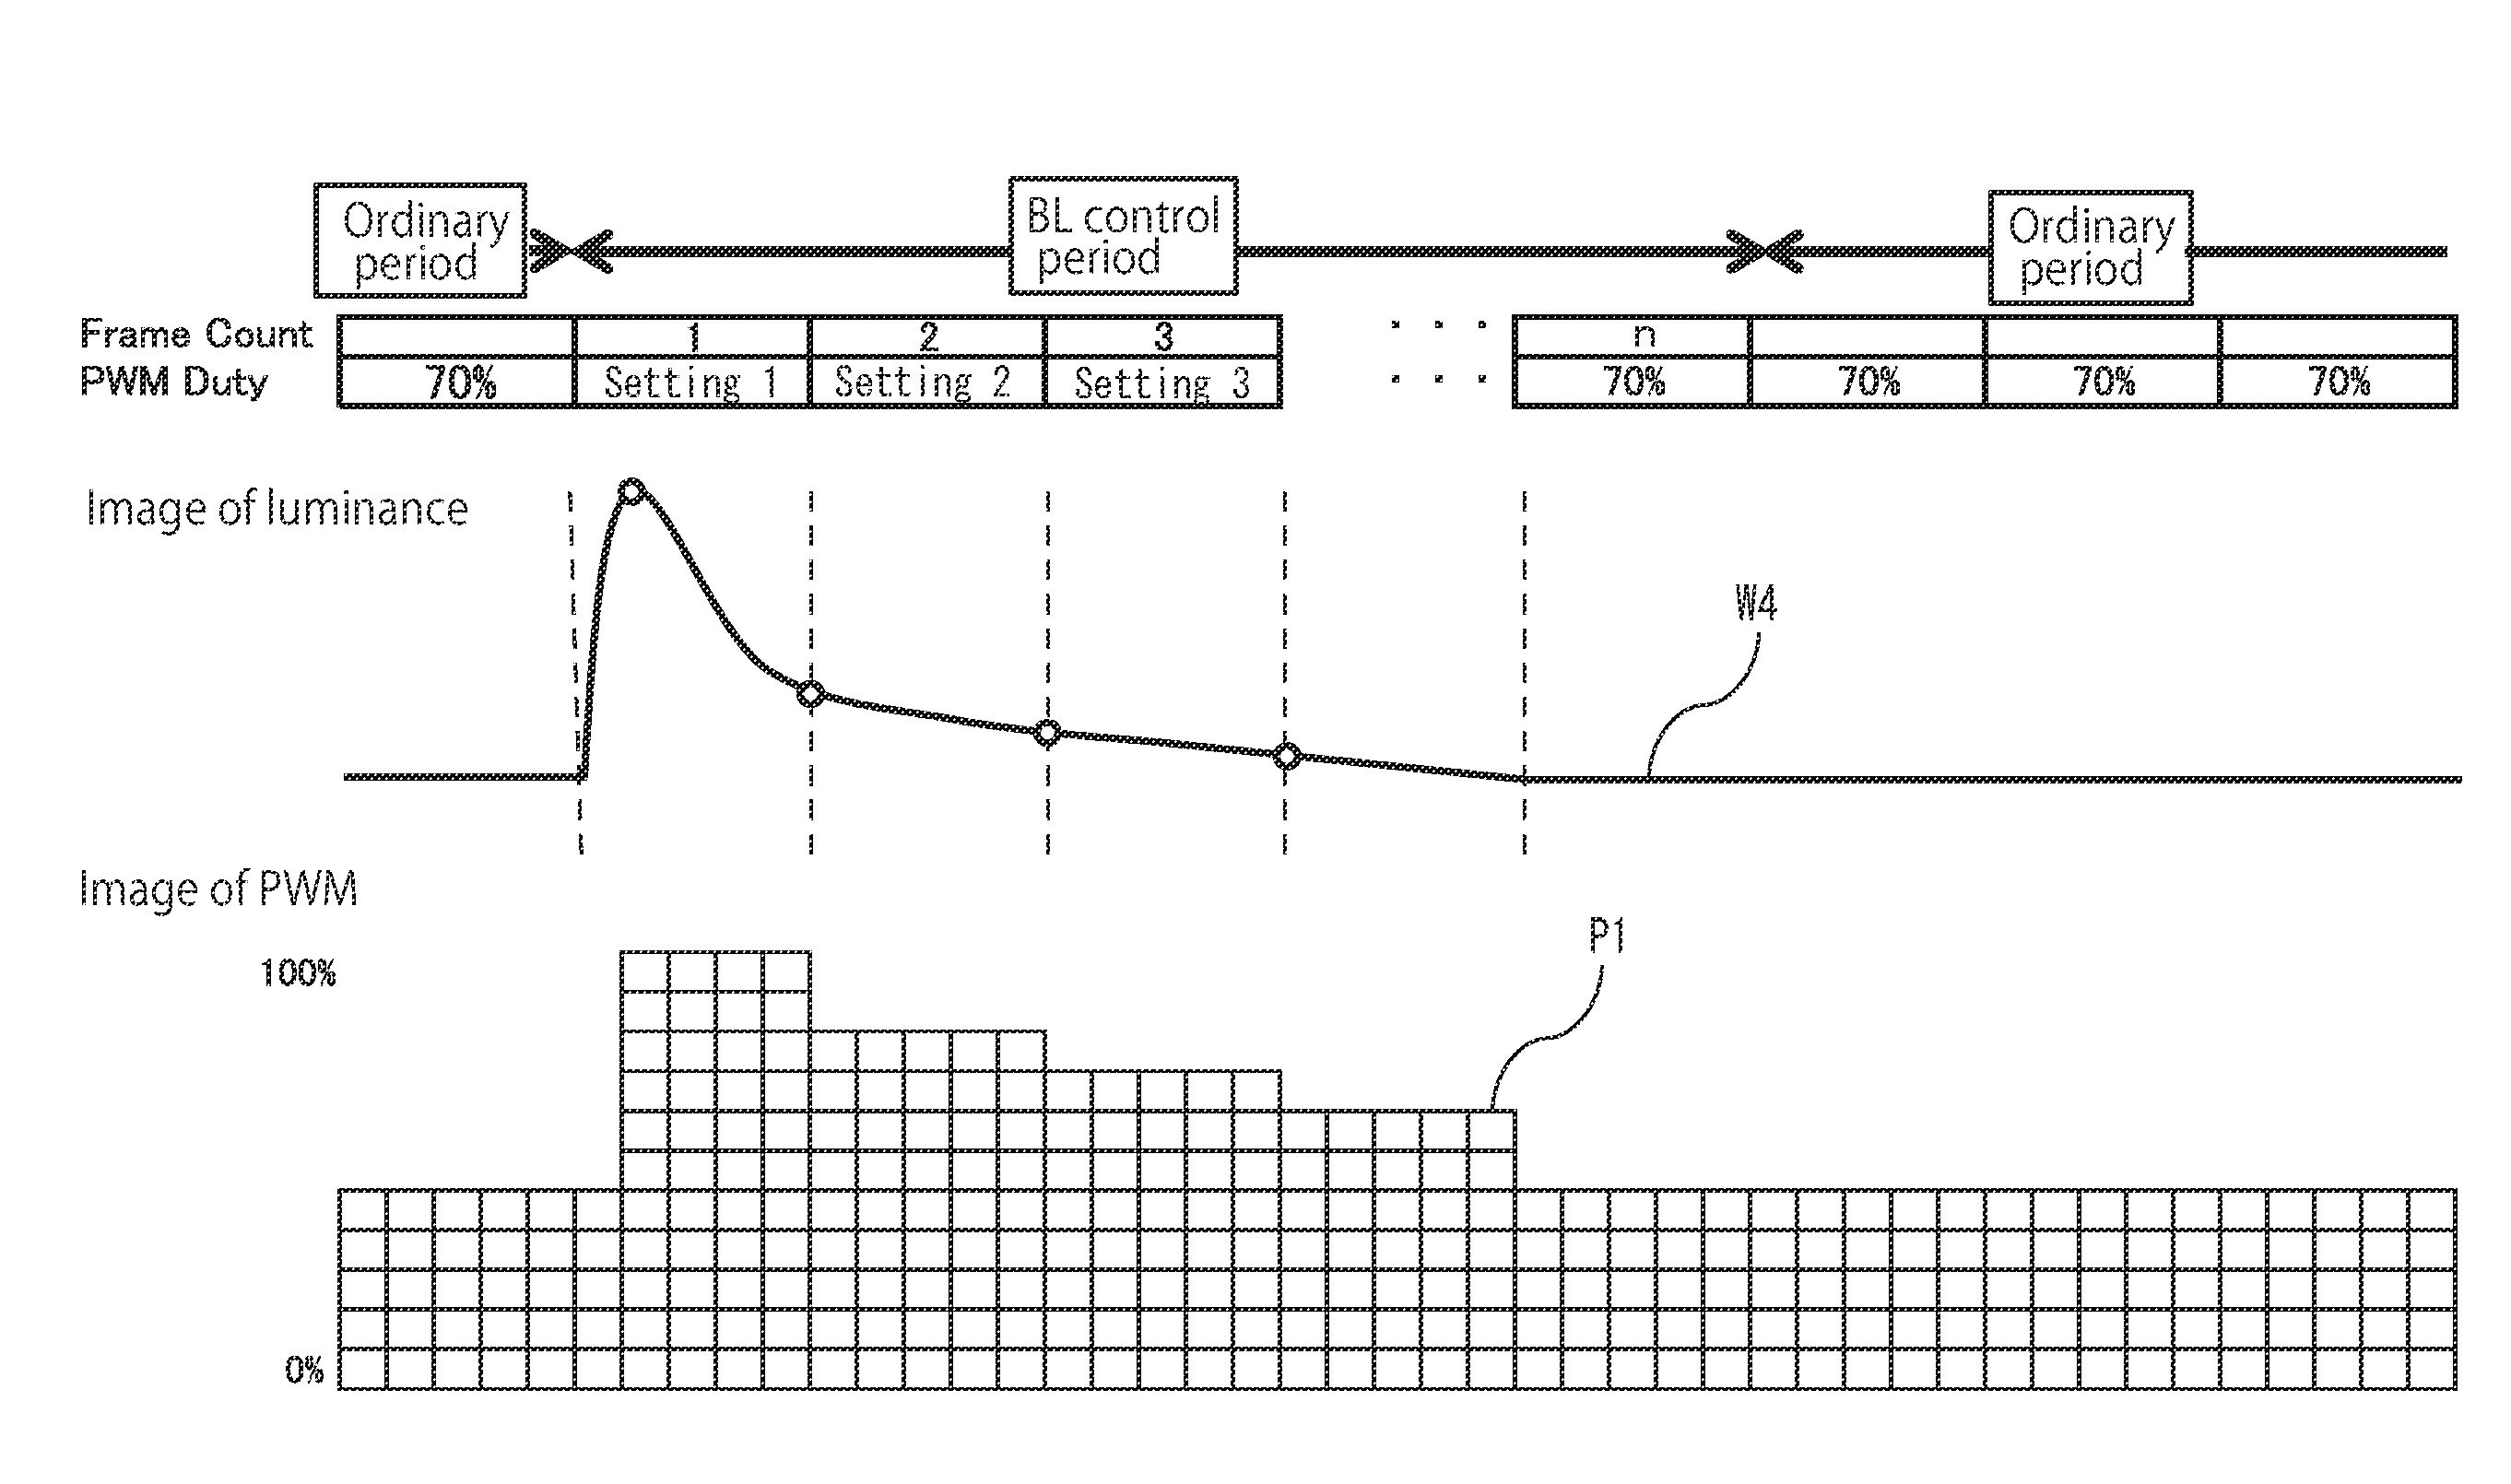 Display apparatus and control device